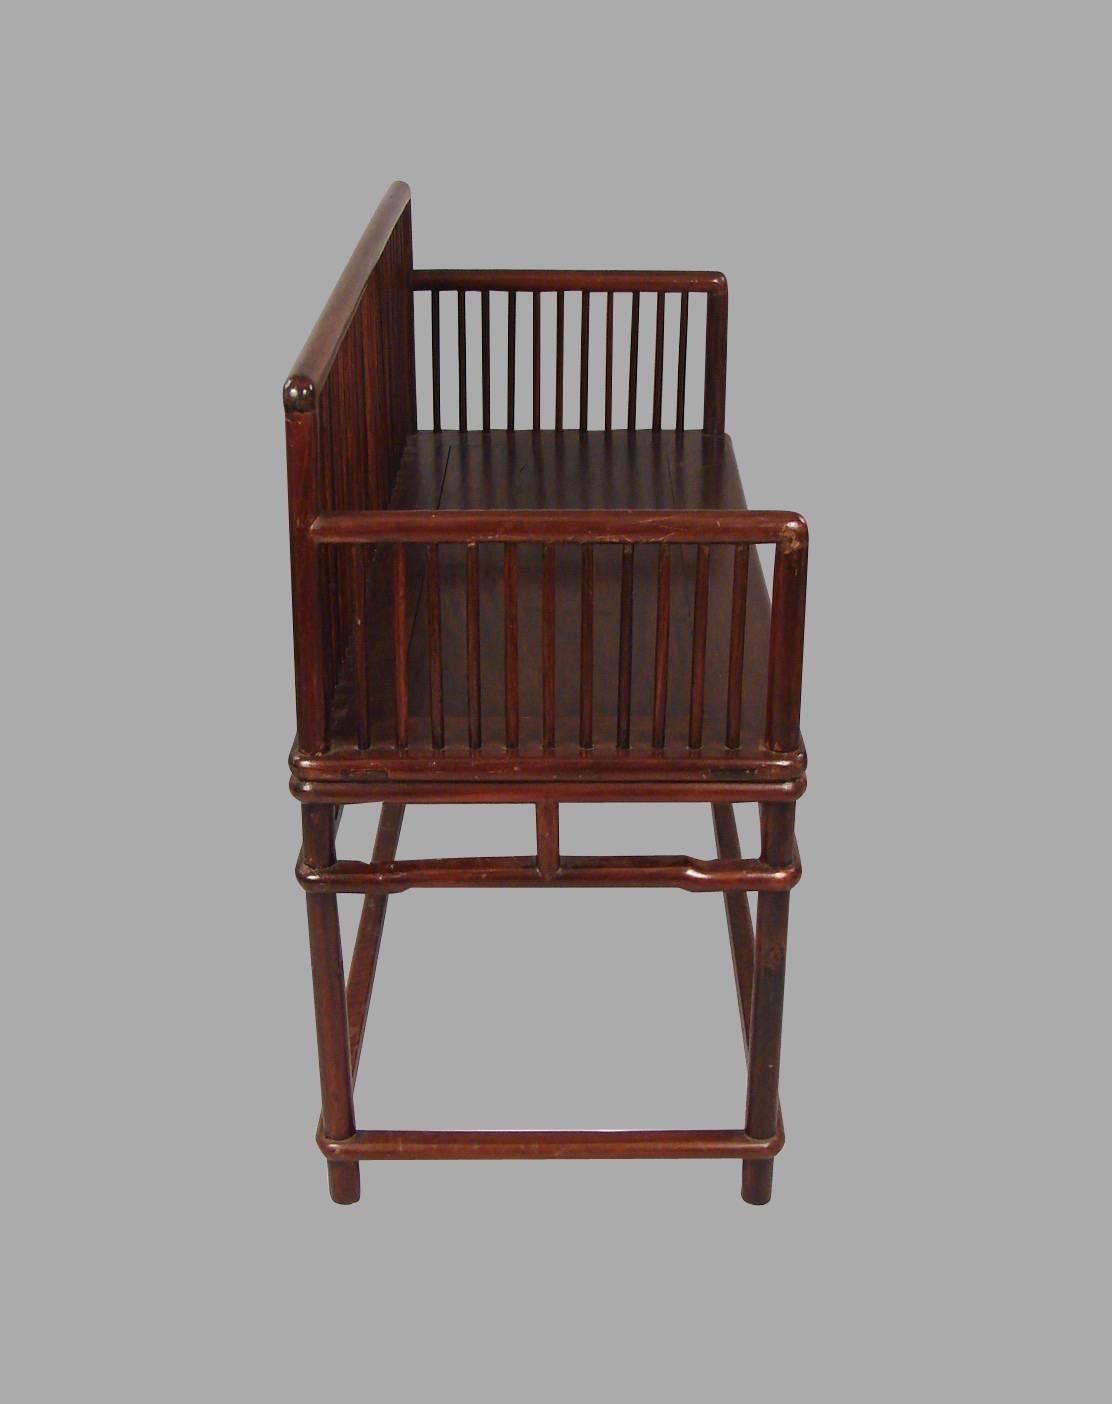 A Chinese Ming style hardwood spindle back bench with a paneled seat and spindled sides, supported on an elegant Ming style base, 19th century.